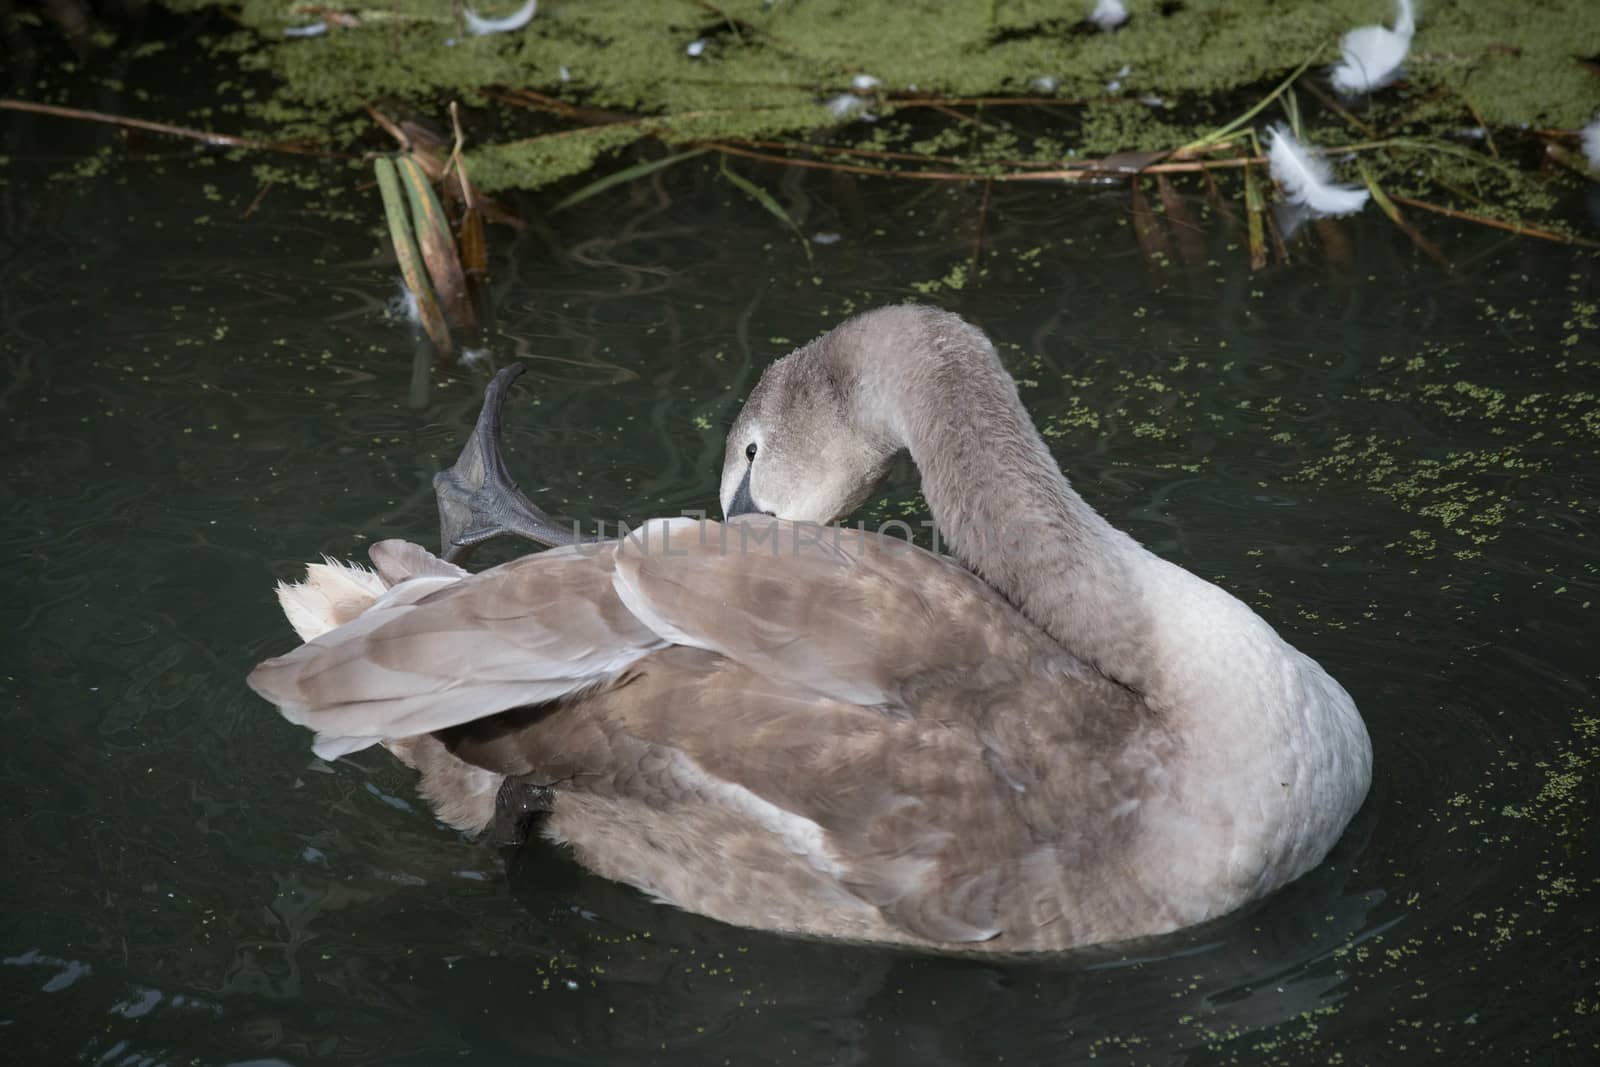 Cygnet preens her feathers